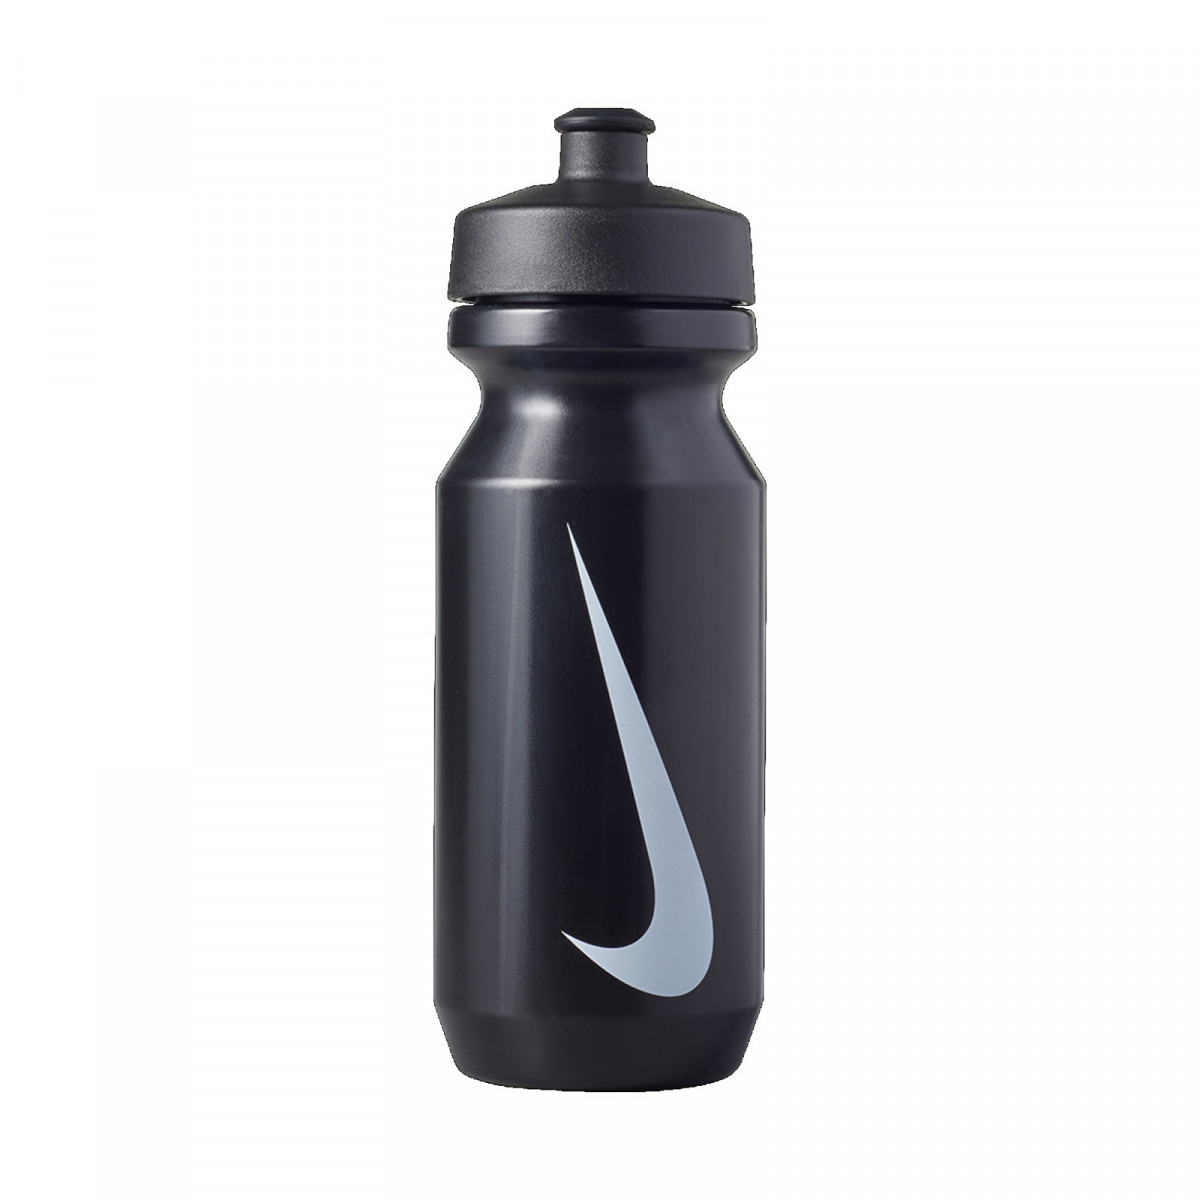 Buy Nike Top Products Online | lazada.sg